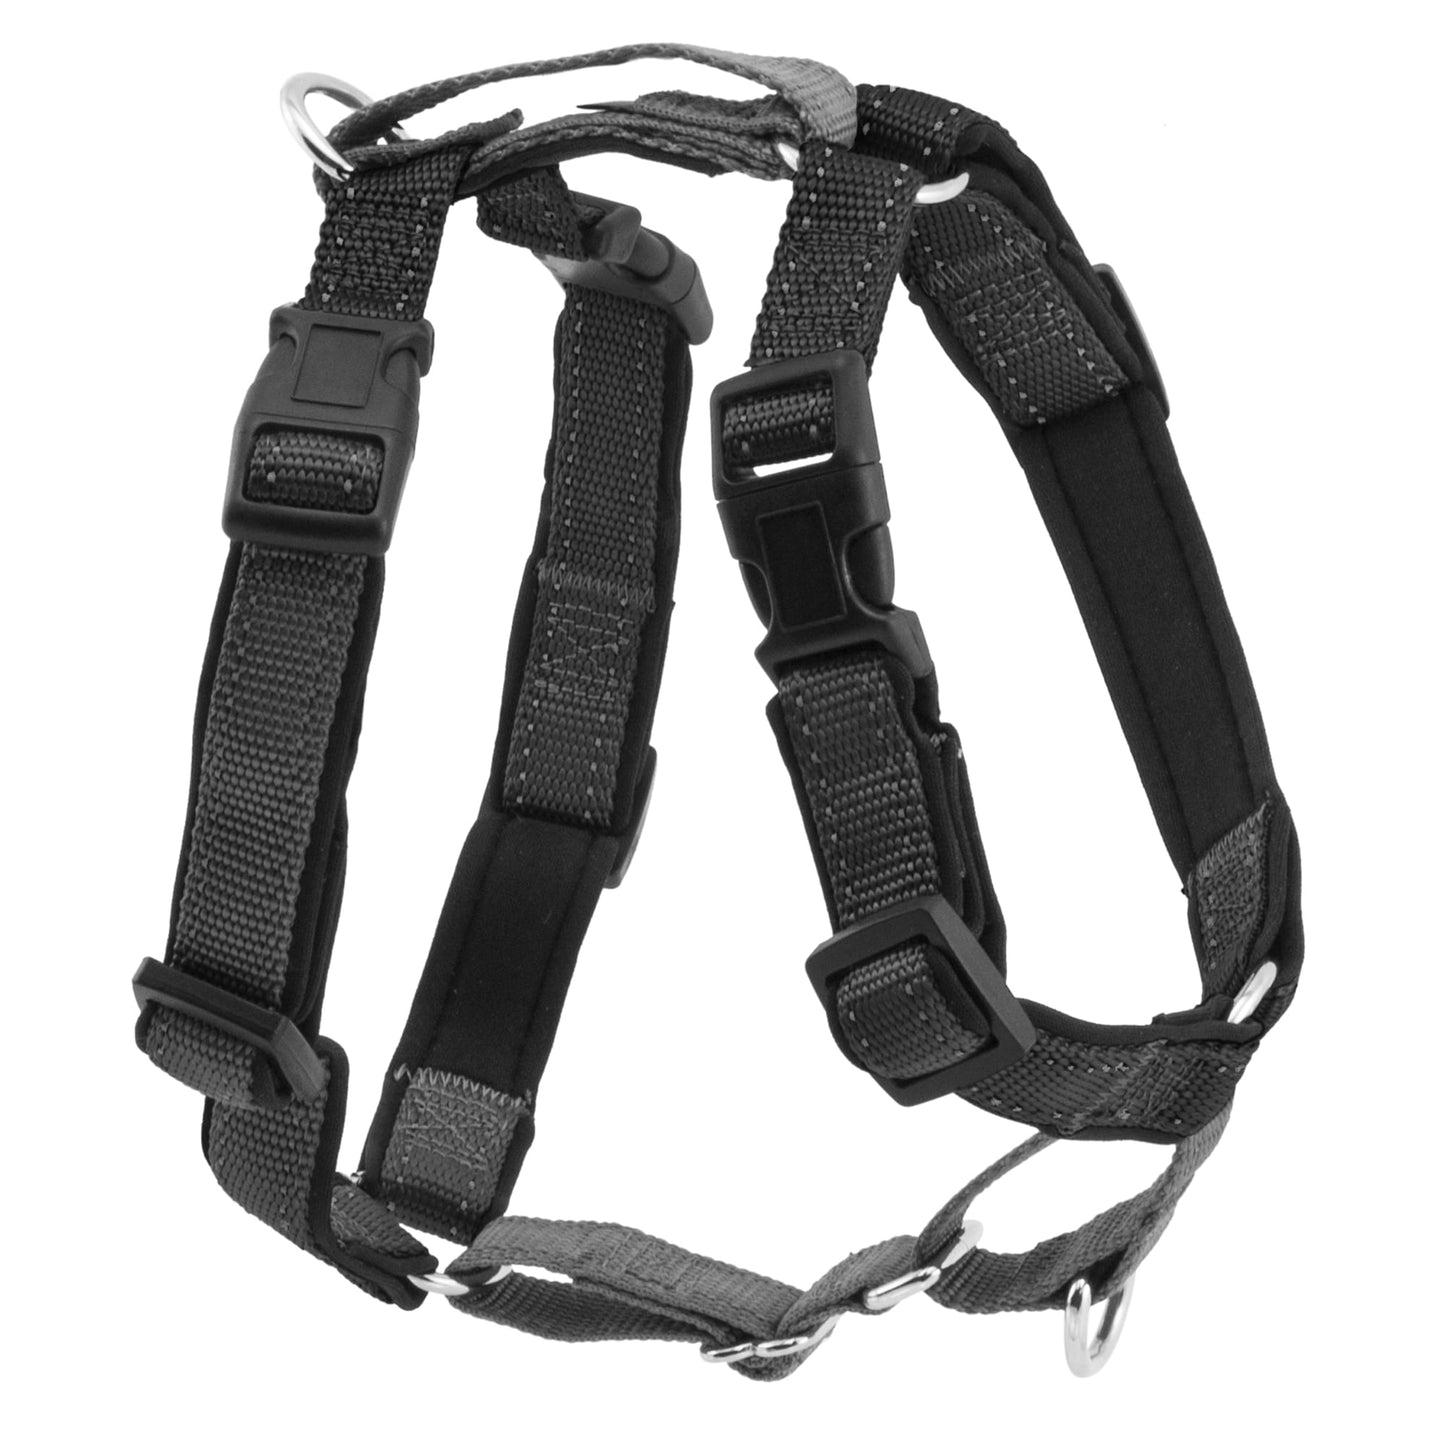 PetSafe 3 in 1 Harness  No-Pull Dog Harness and Car Restraint  Large  Black